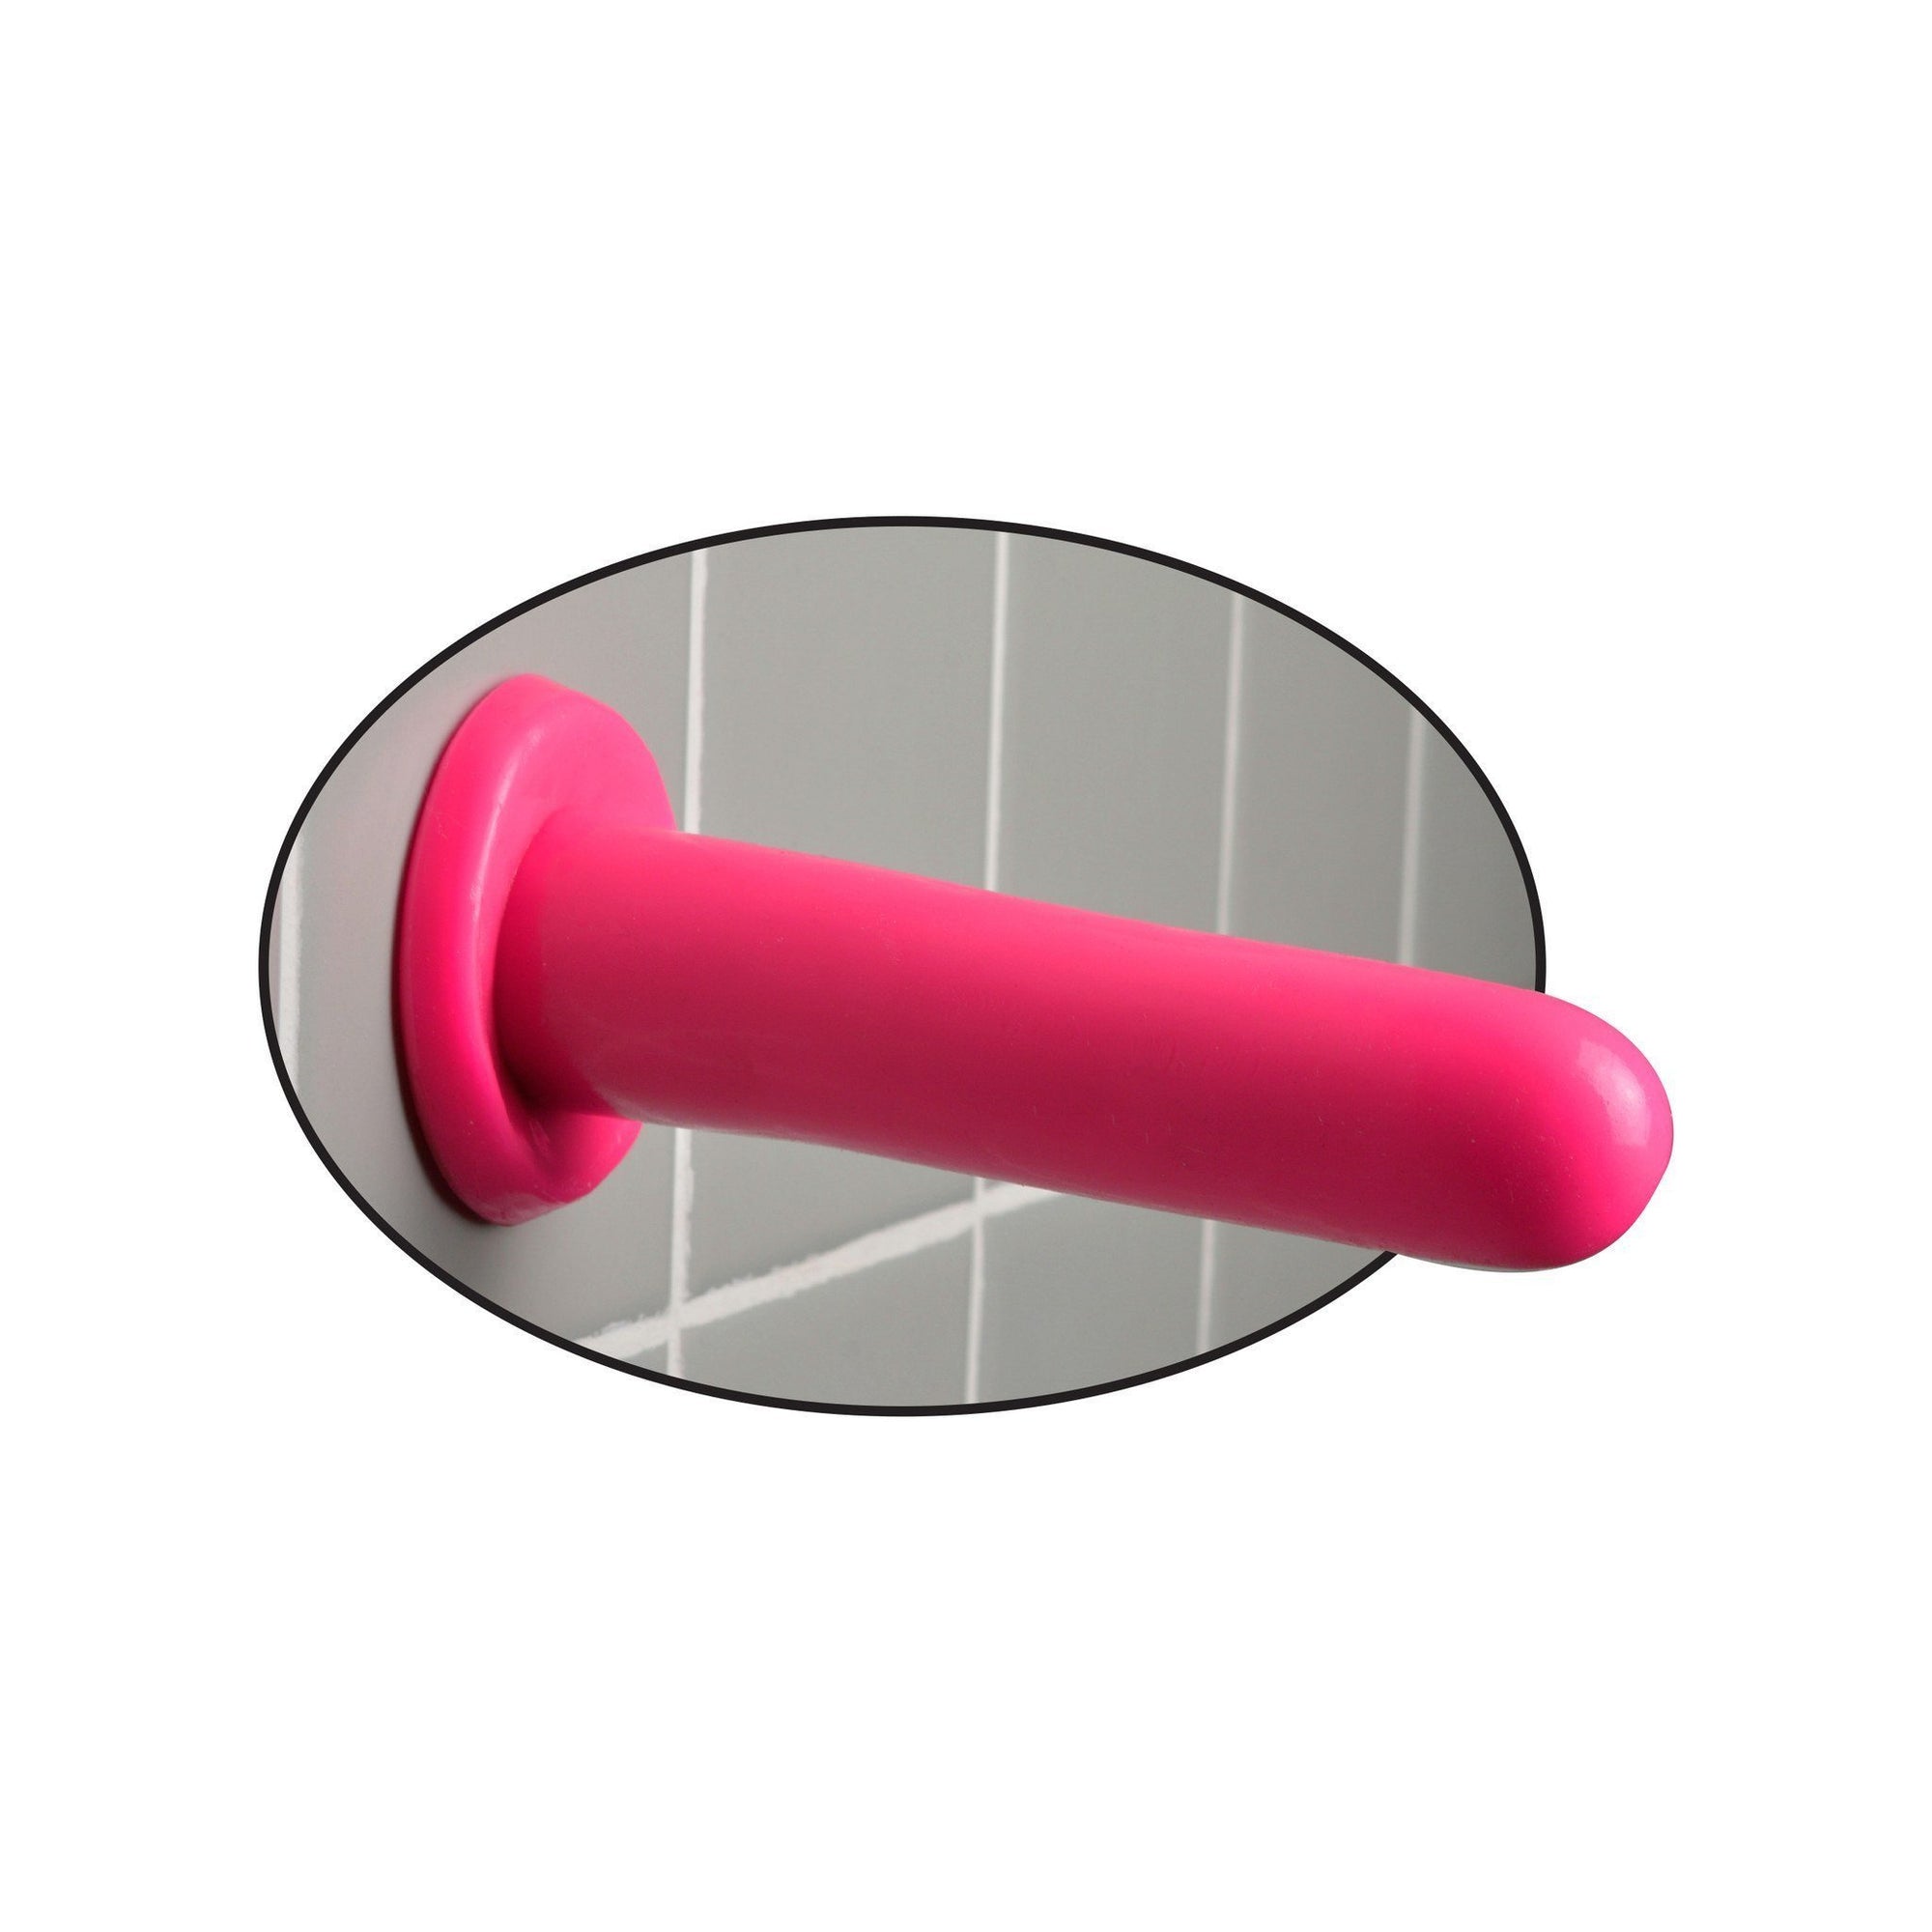 Pipedream - Dillio Mr. Smoothy Dildo (Pink) Non Realistic Dildo with suction cup (Non Vibration) - CherryAffairs Singapore